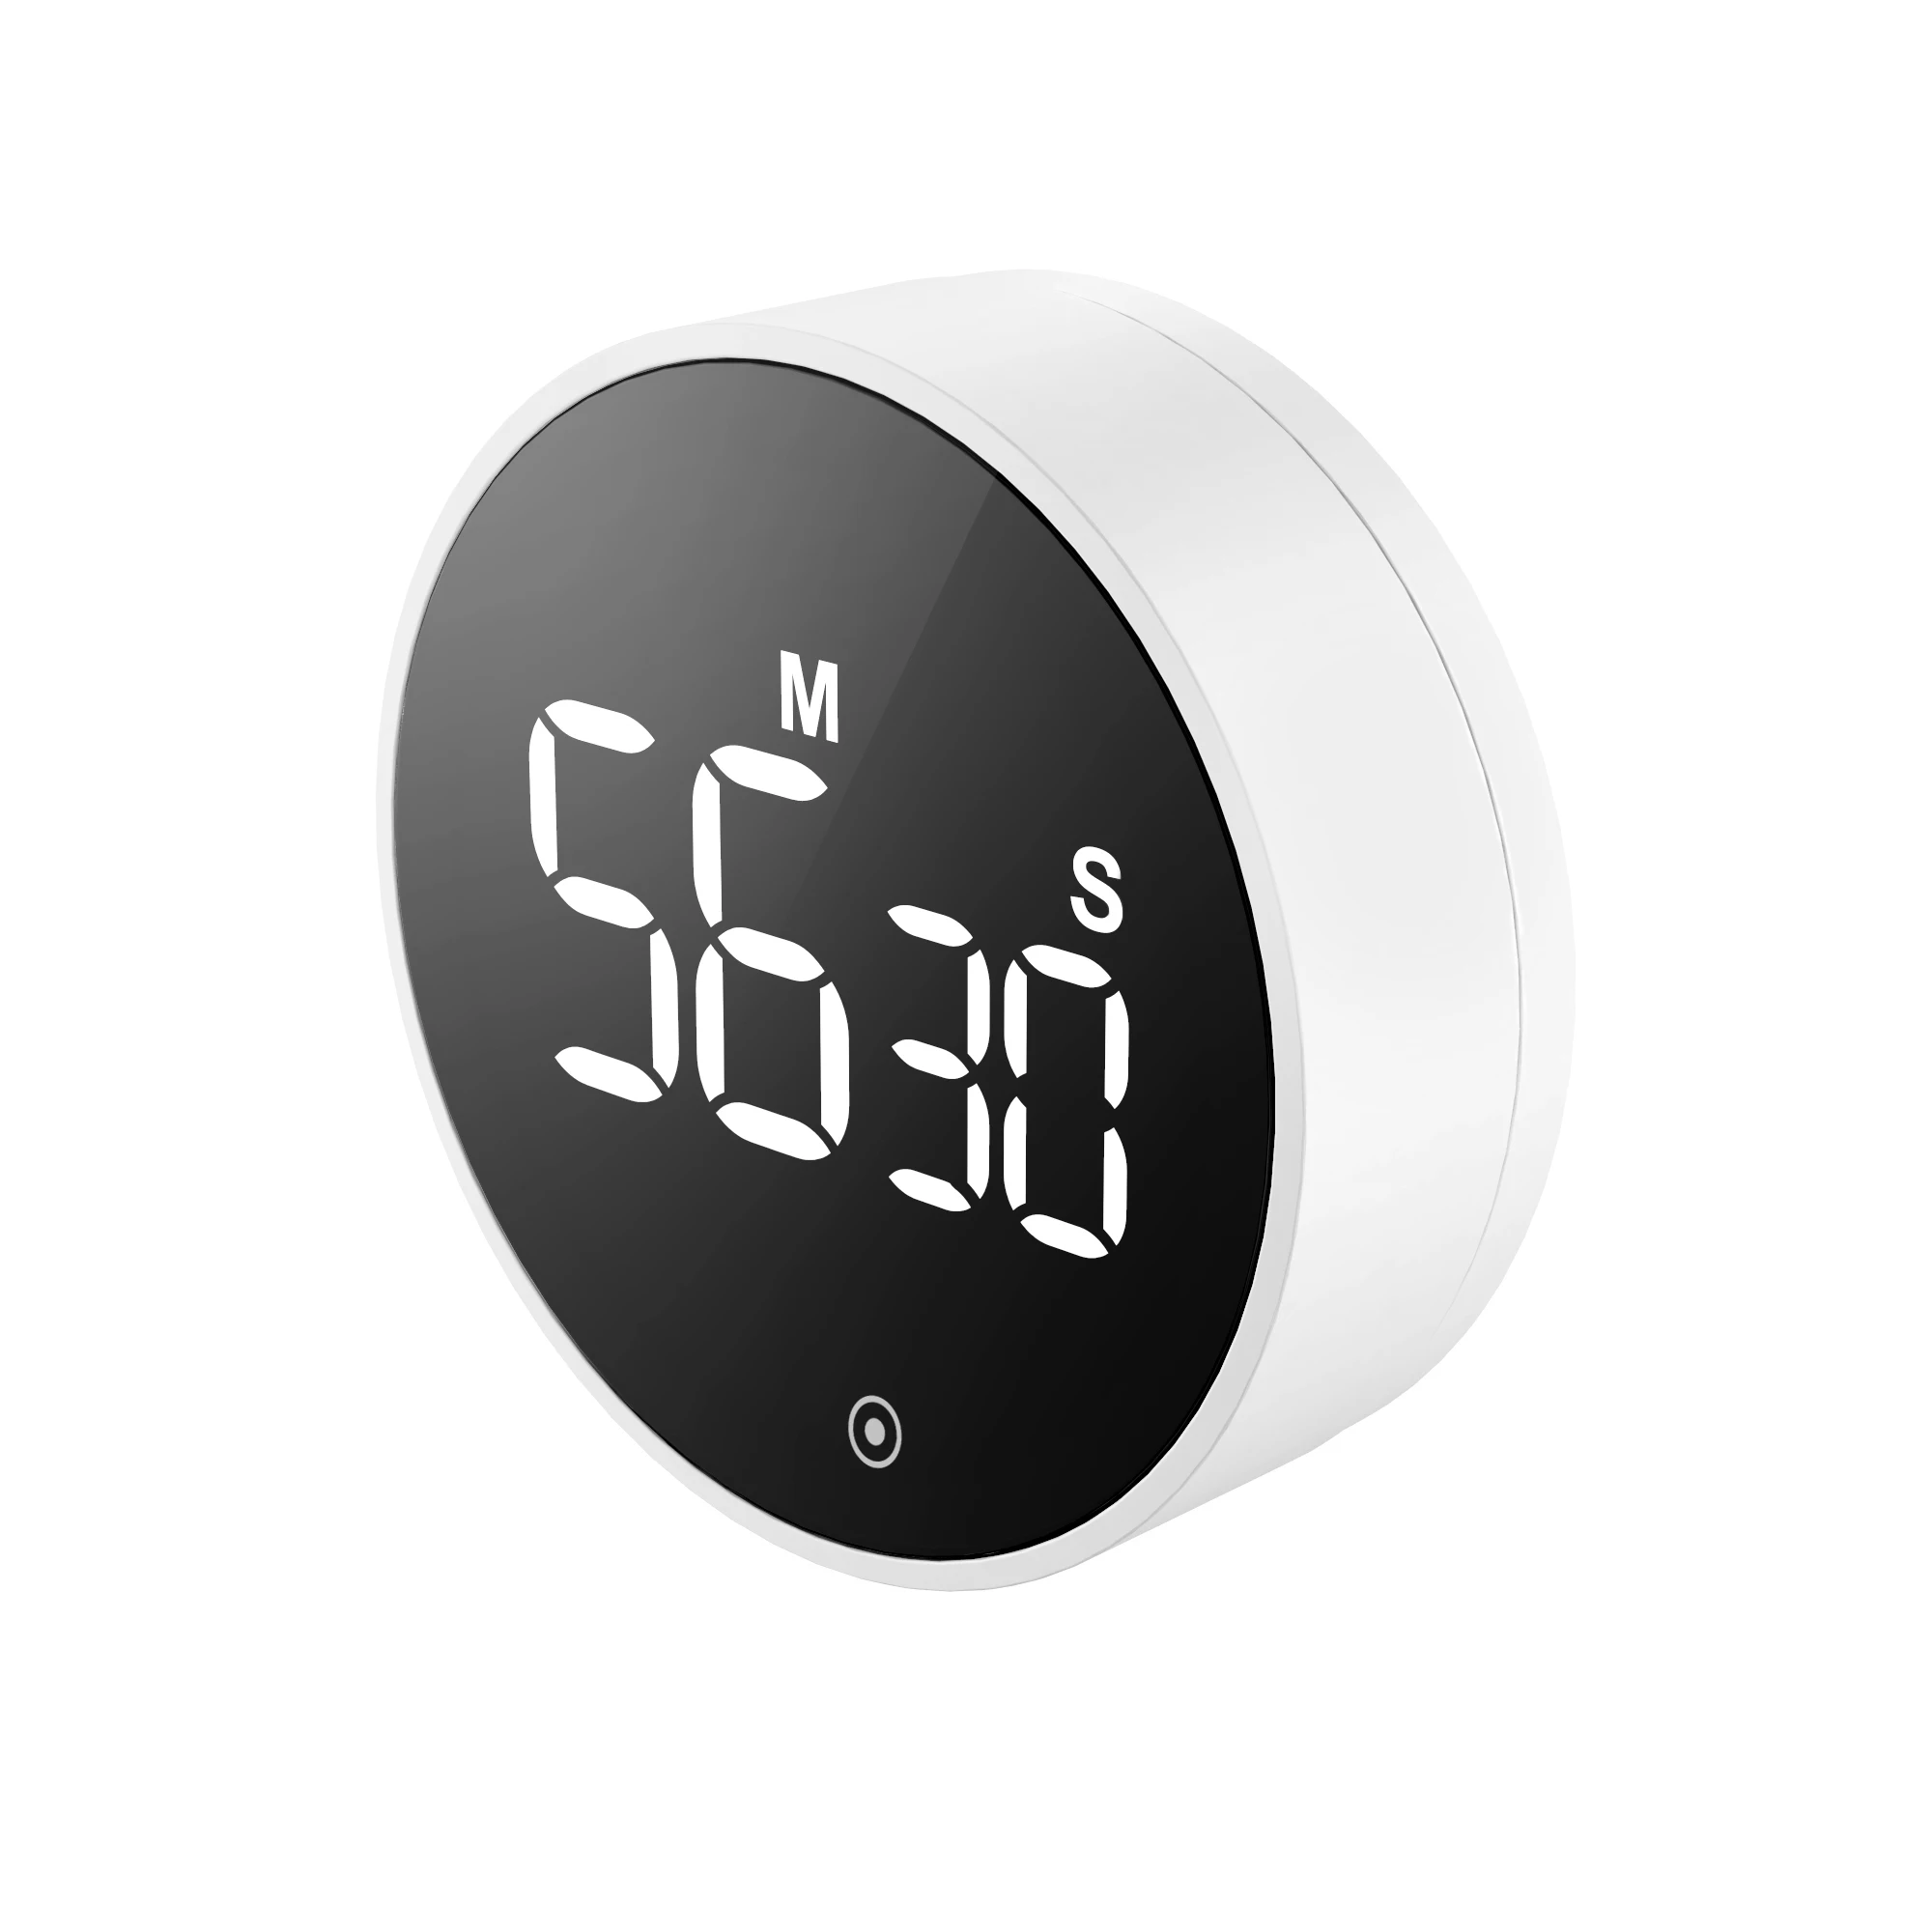 Vocoo Digital Kitchen Timer,Countdown Countup Timer with Large LED Display Volume Adjustment,Timer for Cooking, Classroom - Black, Size: One Size